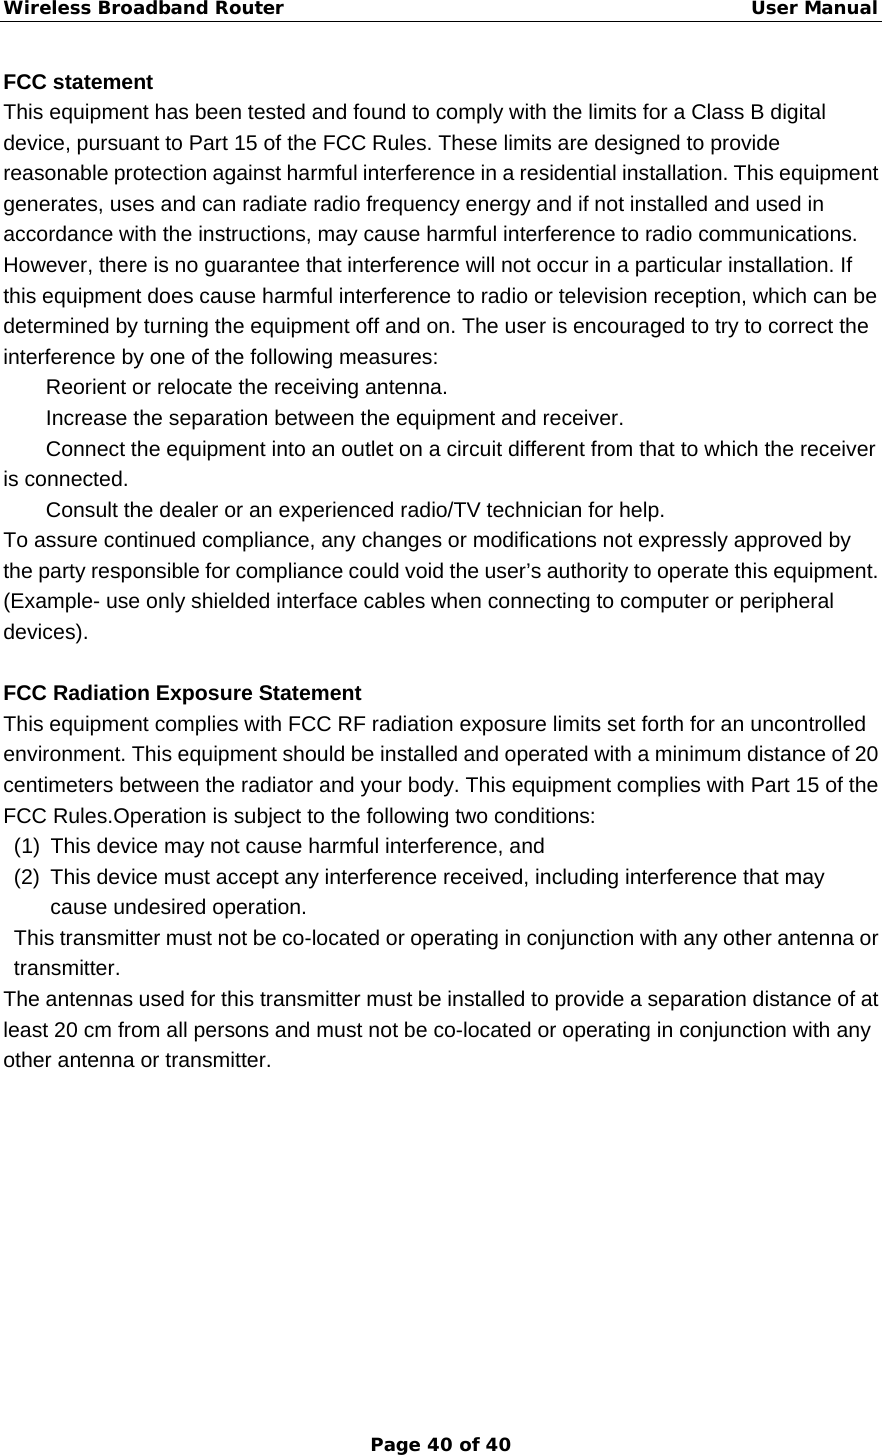 Wireless Broadband Router                                                   User Manual Page 40 of 40 FCC statement     This equipment has been tested and found to comply with the limits for a Class B digital device, pursuant to Part 15 of the FCC Rules. These limits are designed to provide reasonable protection against harmful interference in a residential installation. This equipment generates, uses and can radiate radio frequency energy and if not installed and used in accordance with the instructions, may cause harmful interference to radio communications. However, there is no guarantee that interference will not occur in a particular installation. If this equipment does cause harmful interference to radio or television reception, which can be determined by turning the equipment off and on. The user is encouraged to try to correct the interference by one of the following measures:   Reorient or relocate the receiving antenna.   Increase the separation between the equipment and receiver.   Connect the equipment into an outlet on a circuit different from that to which the receiver is connected.   Consult the dealer or an experienced radio/TV technician for help.   To assure continued compliance, any changes or modifications not expressly approved by the party responsible for compliance could void the user’s authority to operate this equipment. (Example- use only shielded interface cables when connecting to computer or peripheral devices).  FCC Radiation Exposure Statement    This equipment complies with FCC RF radiation exposure limits set forth for an uncontrolled environment. This equipment should be installed and operated with a minimum distance of 20 centimeters between the radiator and your body. This equipment complies with Part 15 of the FCC Rules.Operation is subject to the following two conditions:   (1)  This device may not cause harmful interference, and   (2)  This device must accept any interference received, including interference that may cause undesired operation.   This transmitter must not be co-located or operating in conjunction with any other antenna or transmitter. The antennas used for this transmitter must be installed to provide a separation distance of at least 20 cm from all persons and must not be co-located or operating in conjunction with any other antenna or transmitter. 